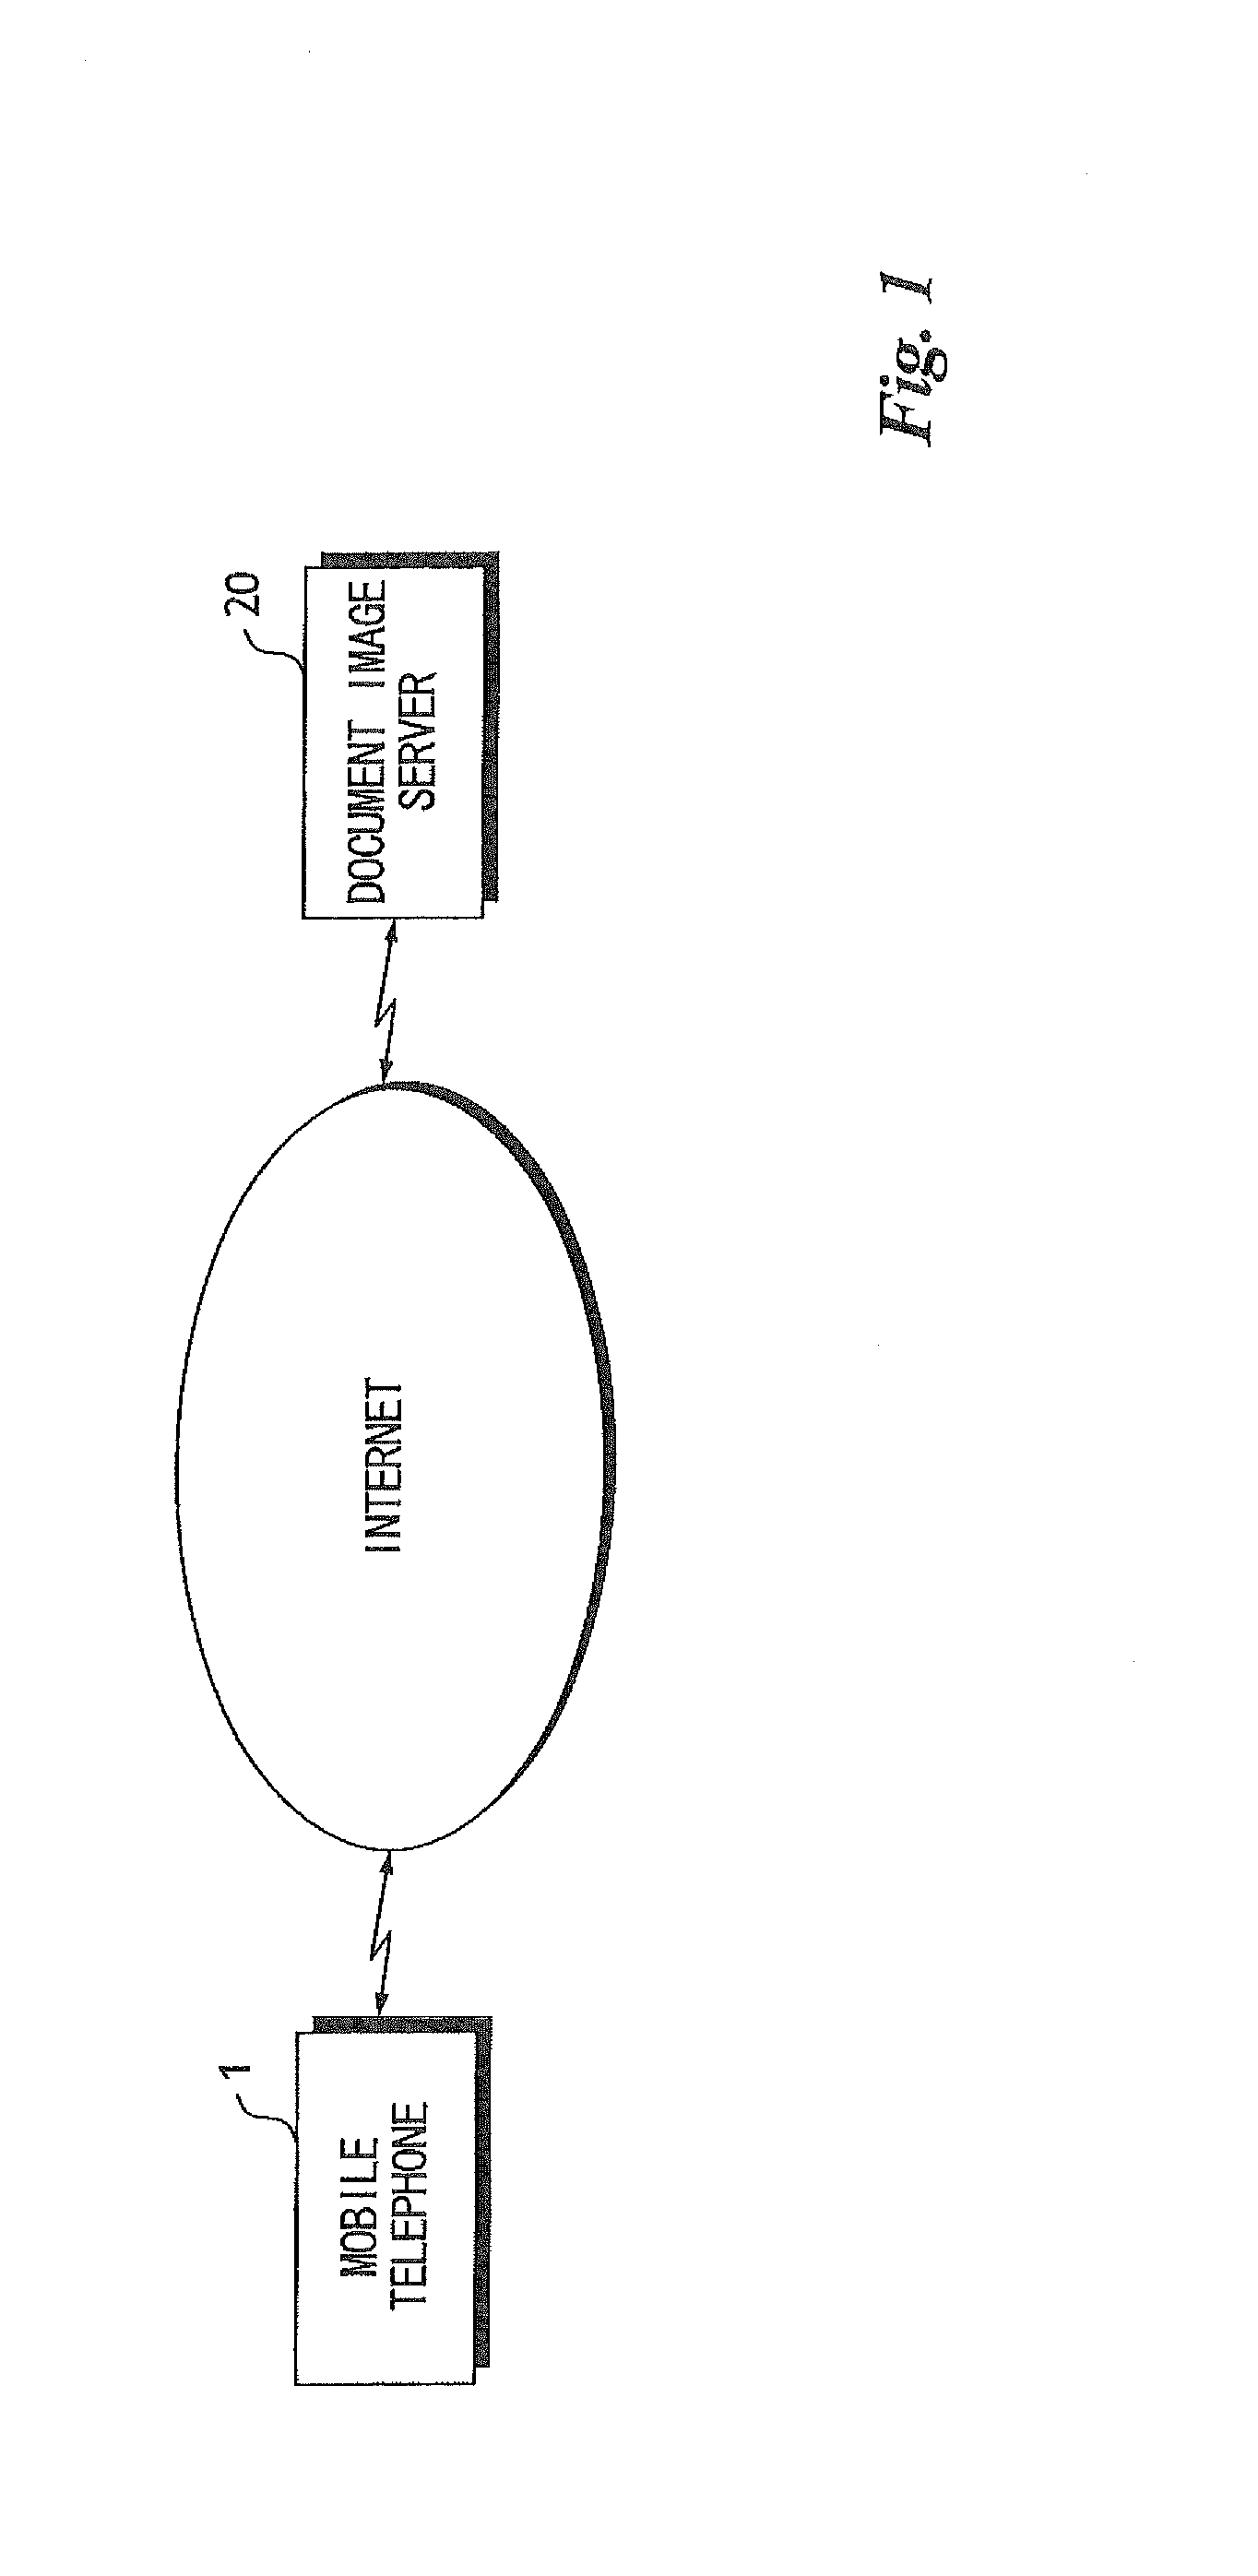 Portable display device, and method for controlling operation of same